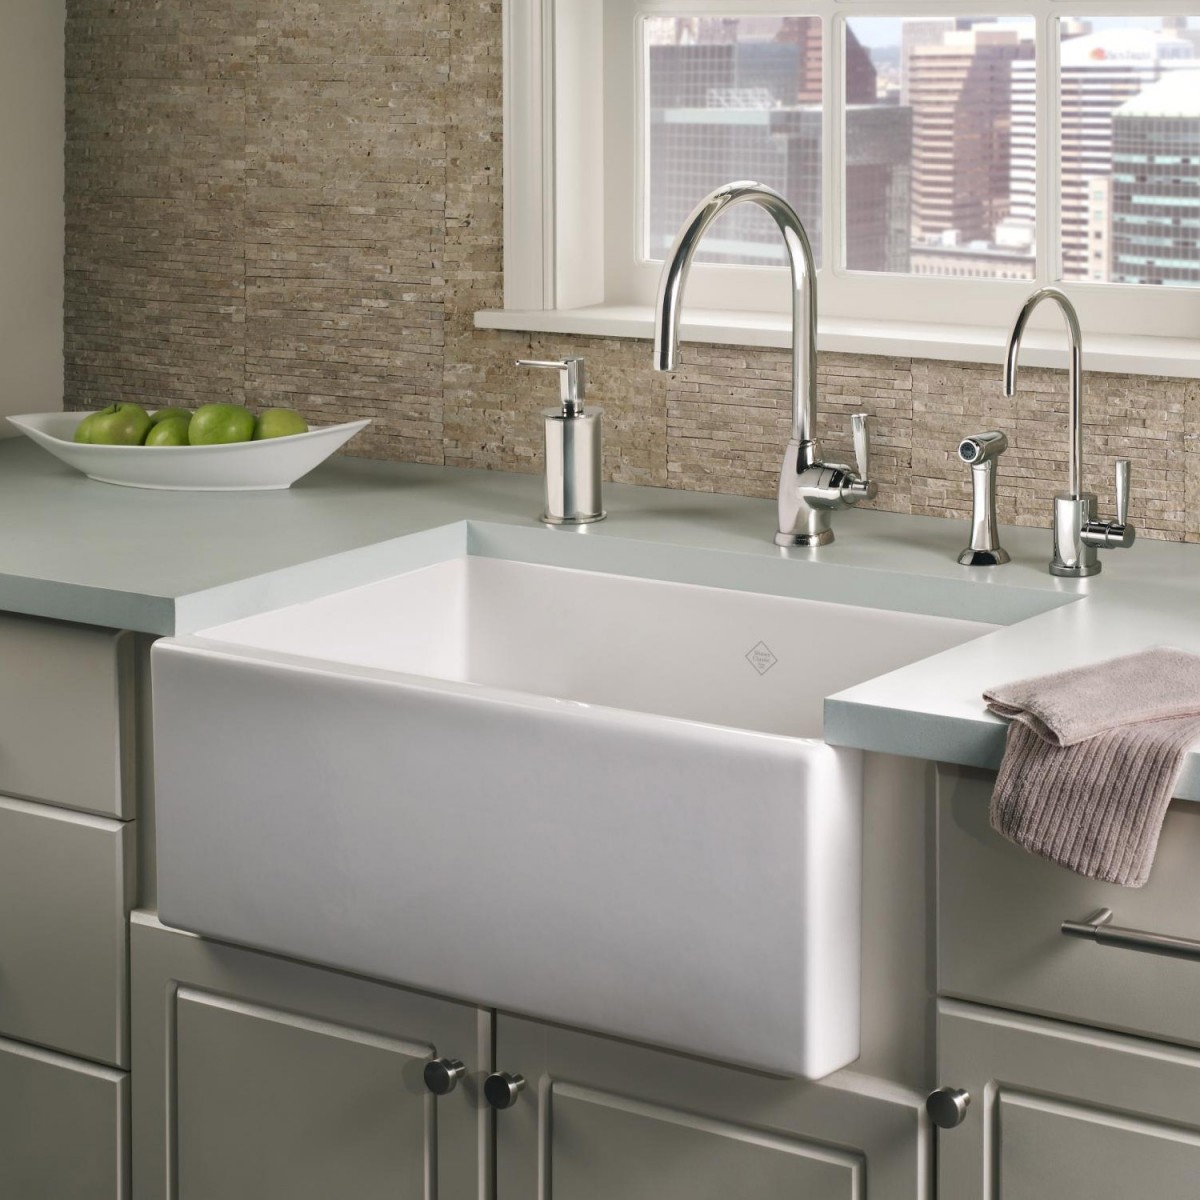 Shaws Shaker Single 800 fireclay butler sink. Distributed in Australia by Luxe by Design, Brisbane.